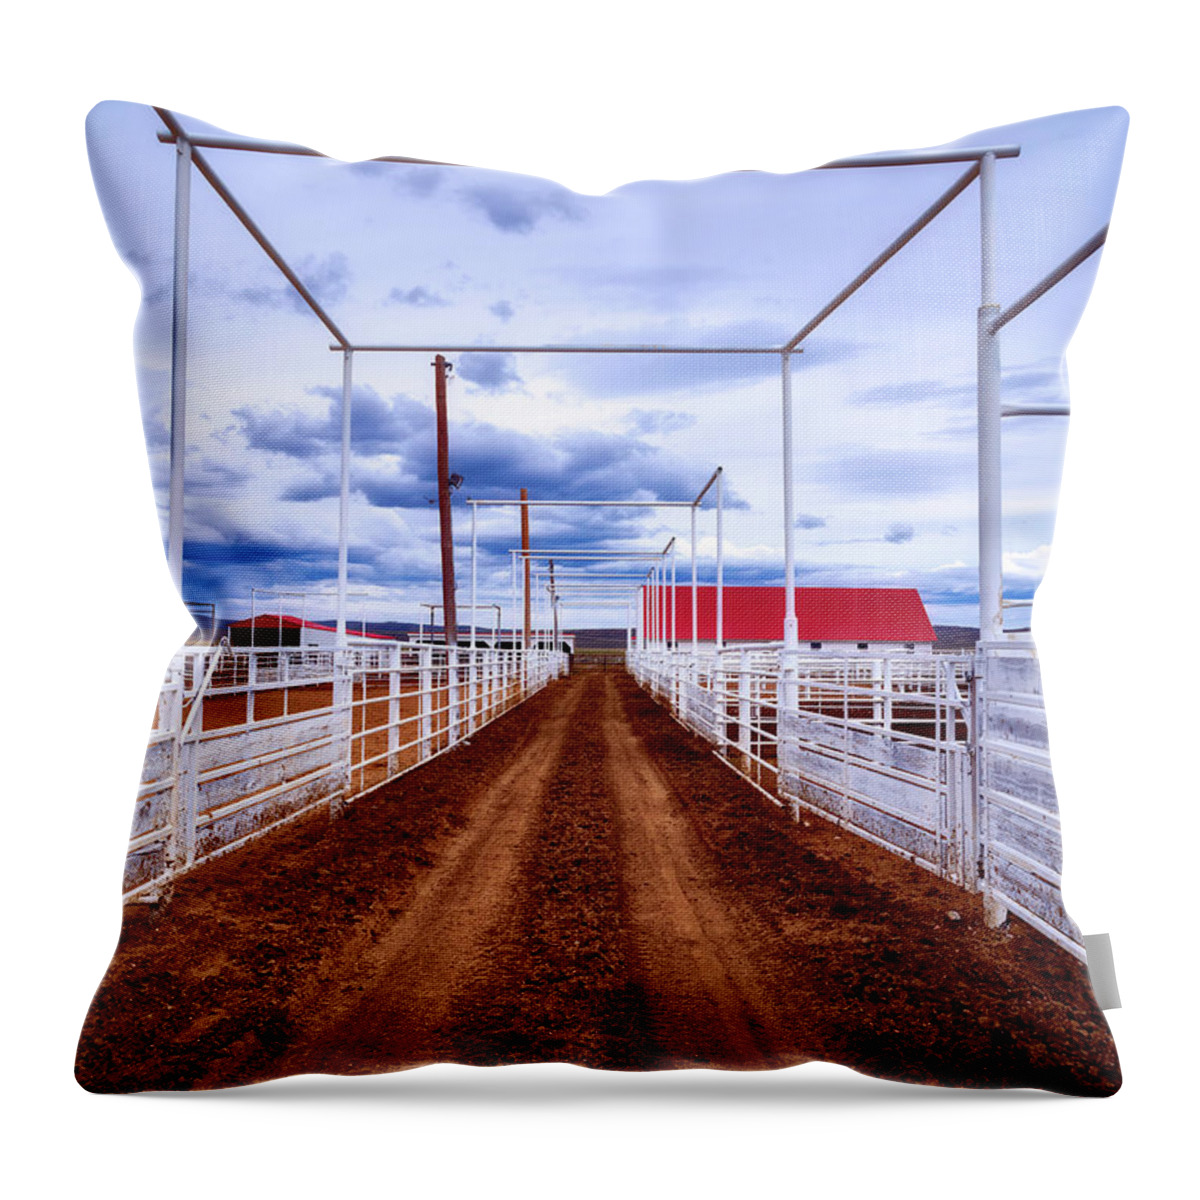 Corrals Throw Pillow featuring the photograph Empty Corrals #1 by Mountain Dreams